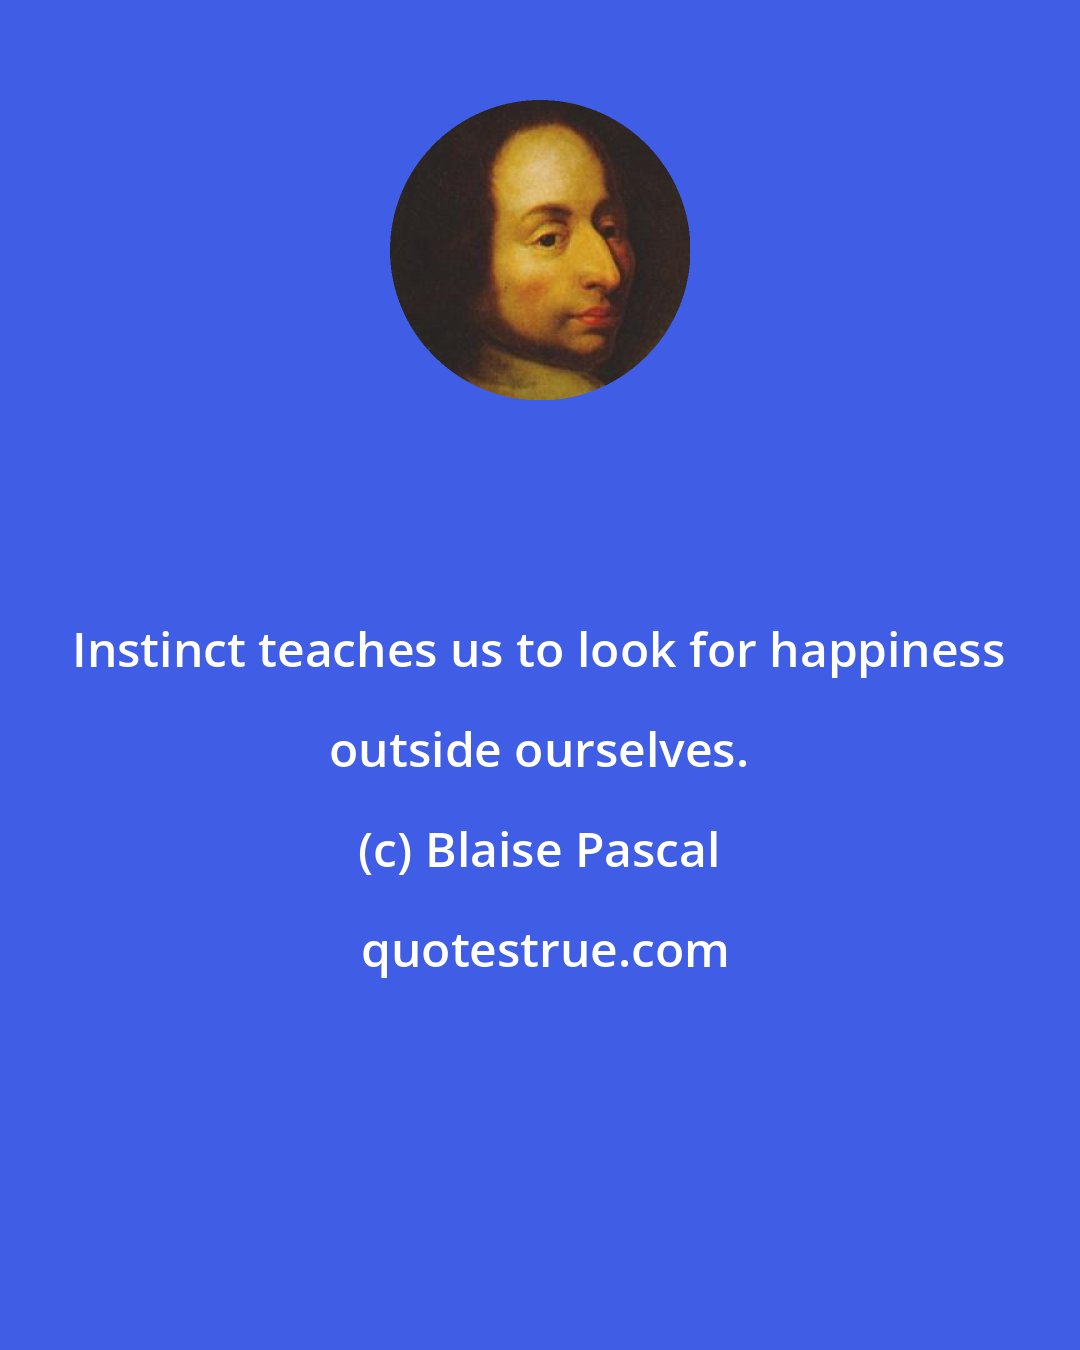 Blaise Pascal: Instinct teaches us to look for happiness outside ourselves.